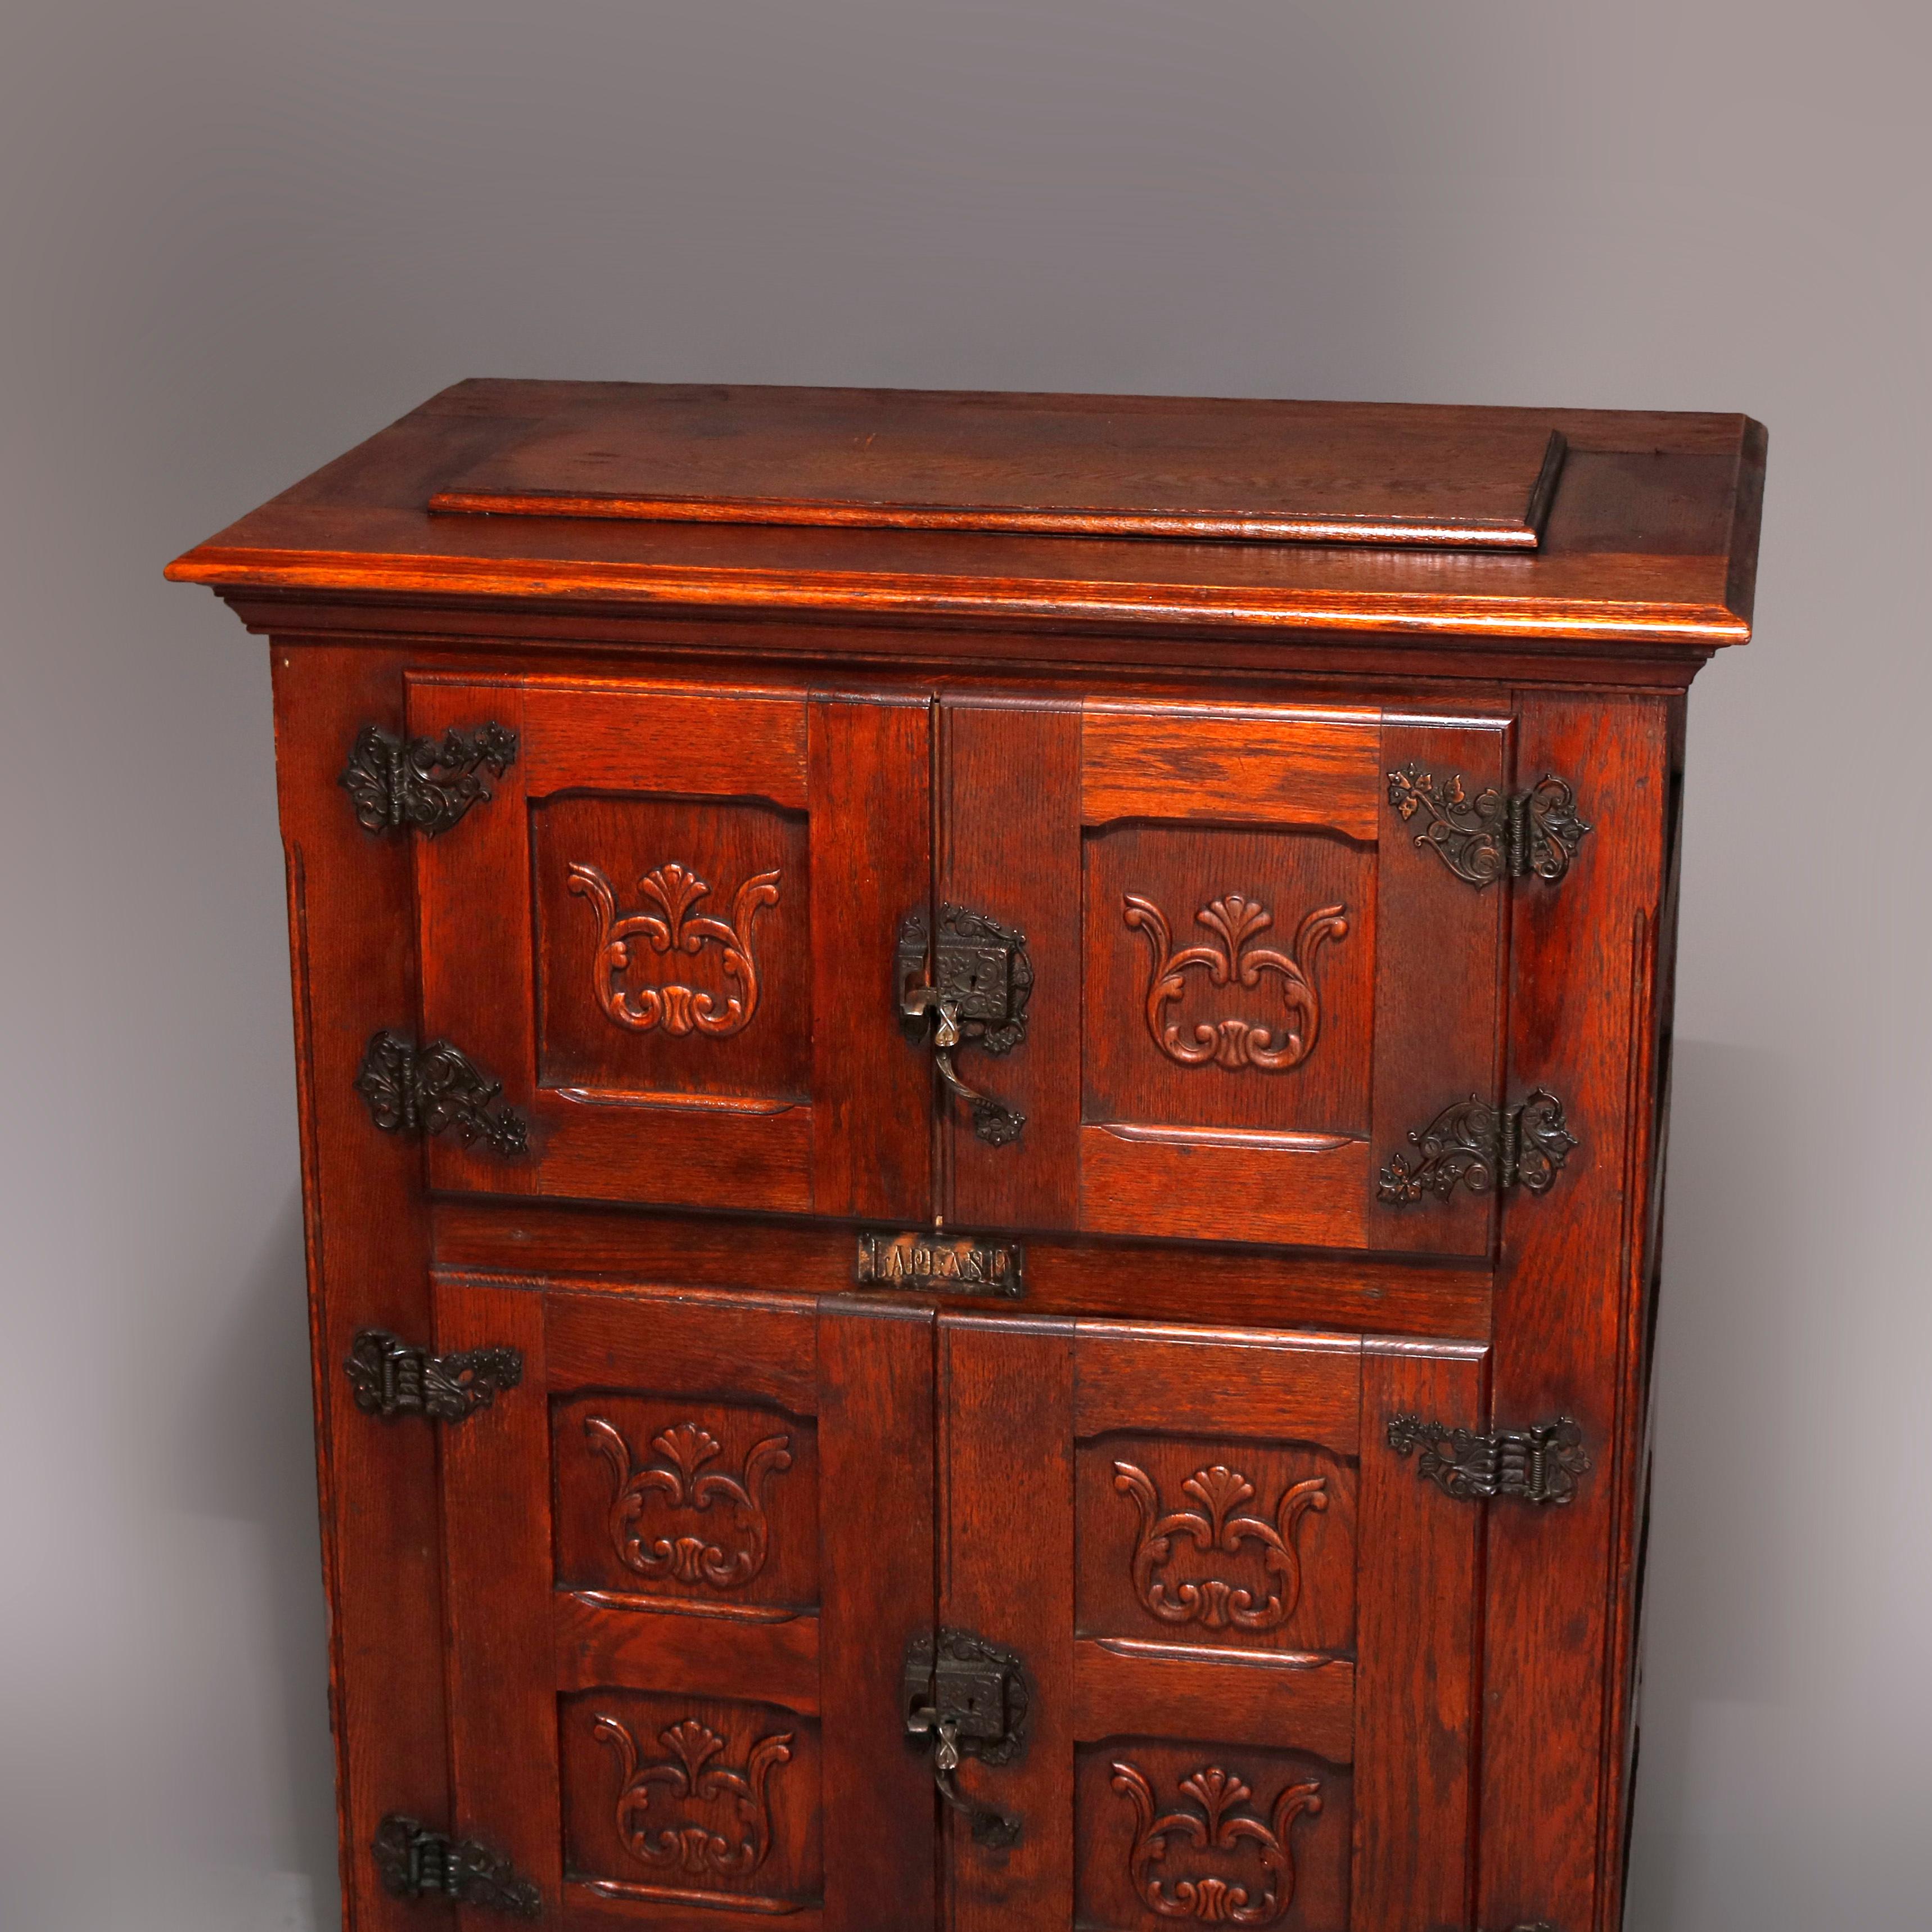 An antique Lapland ice box by Ranney Refrigerator Co. offers paneled oak construction with carved scroll and foliate reserves, caste foliate hardware, double door upper compartment over double door case with shelved interior, tin lined throughout,